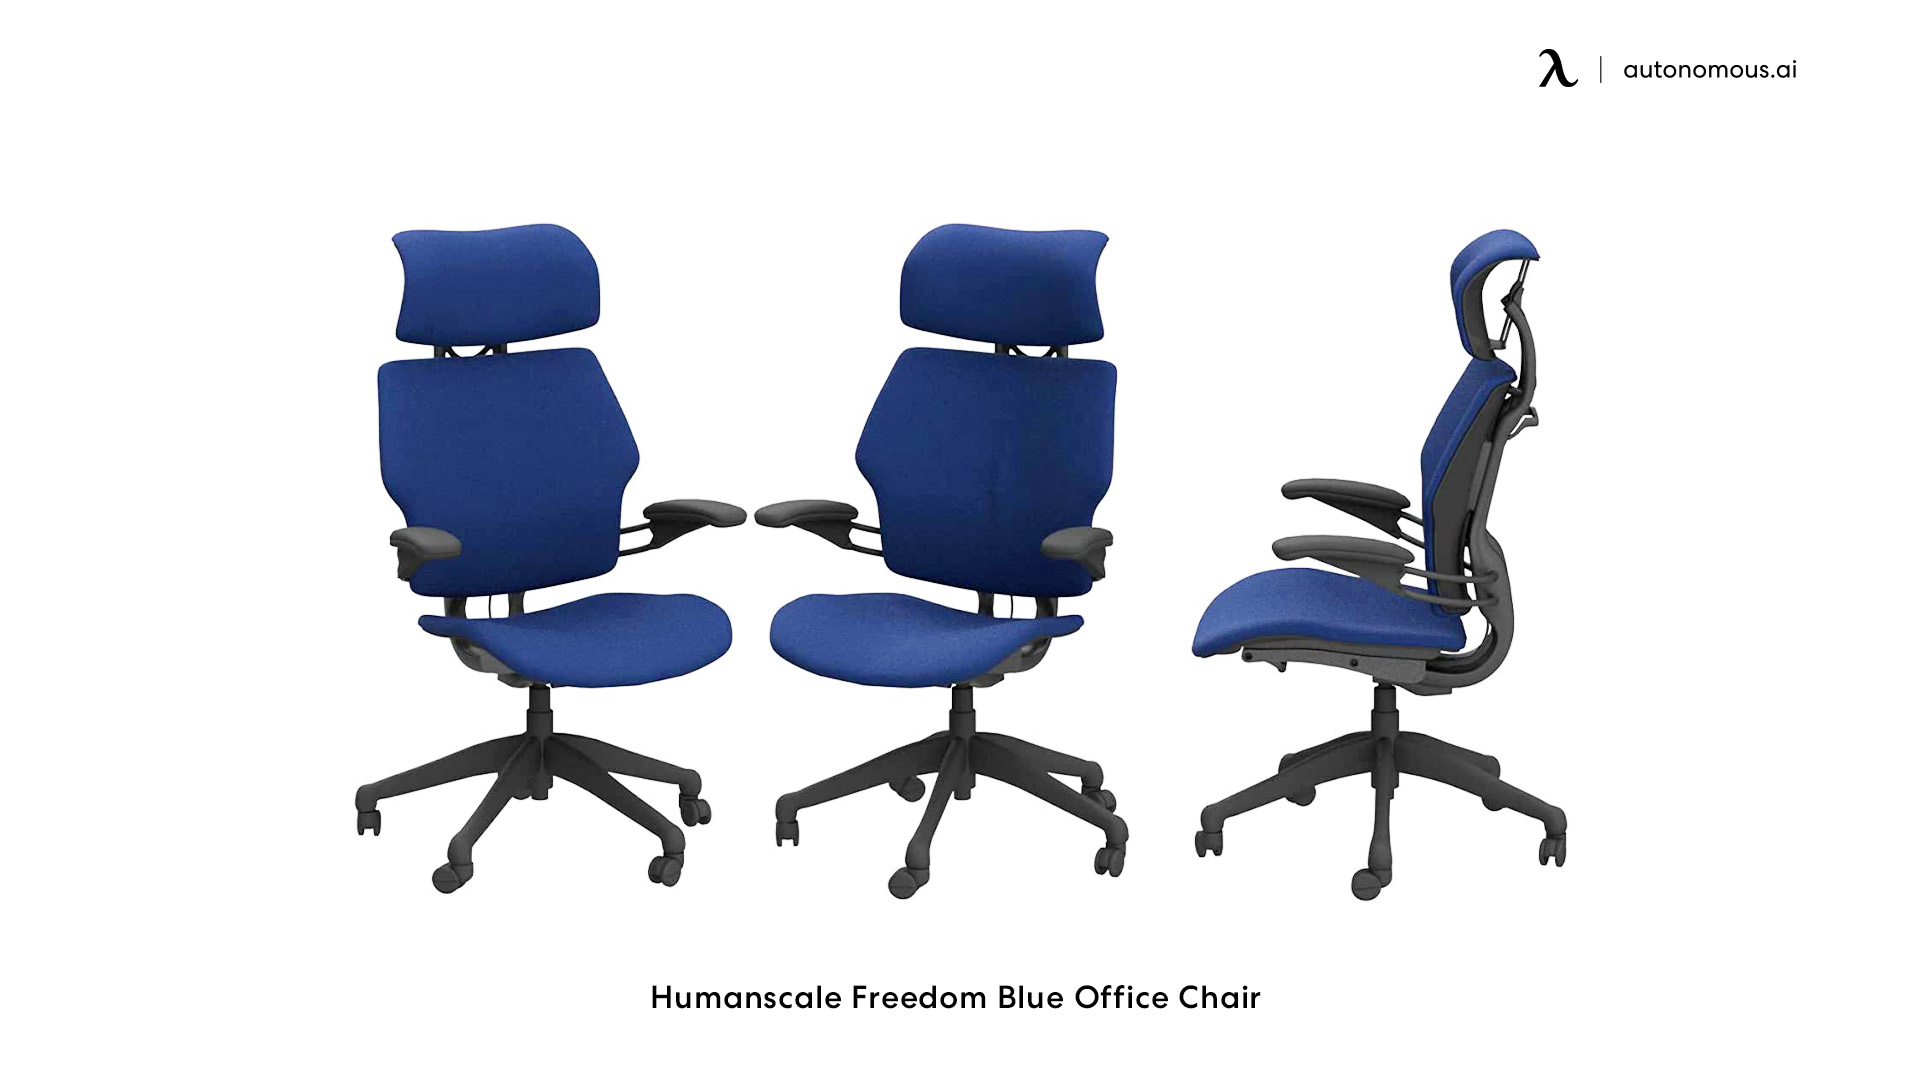 Humanscale Freedom home office chair with back support